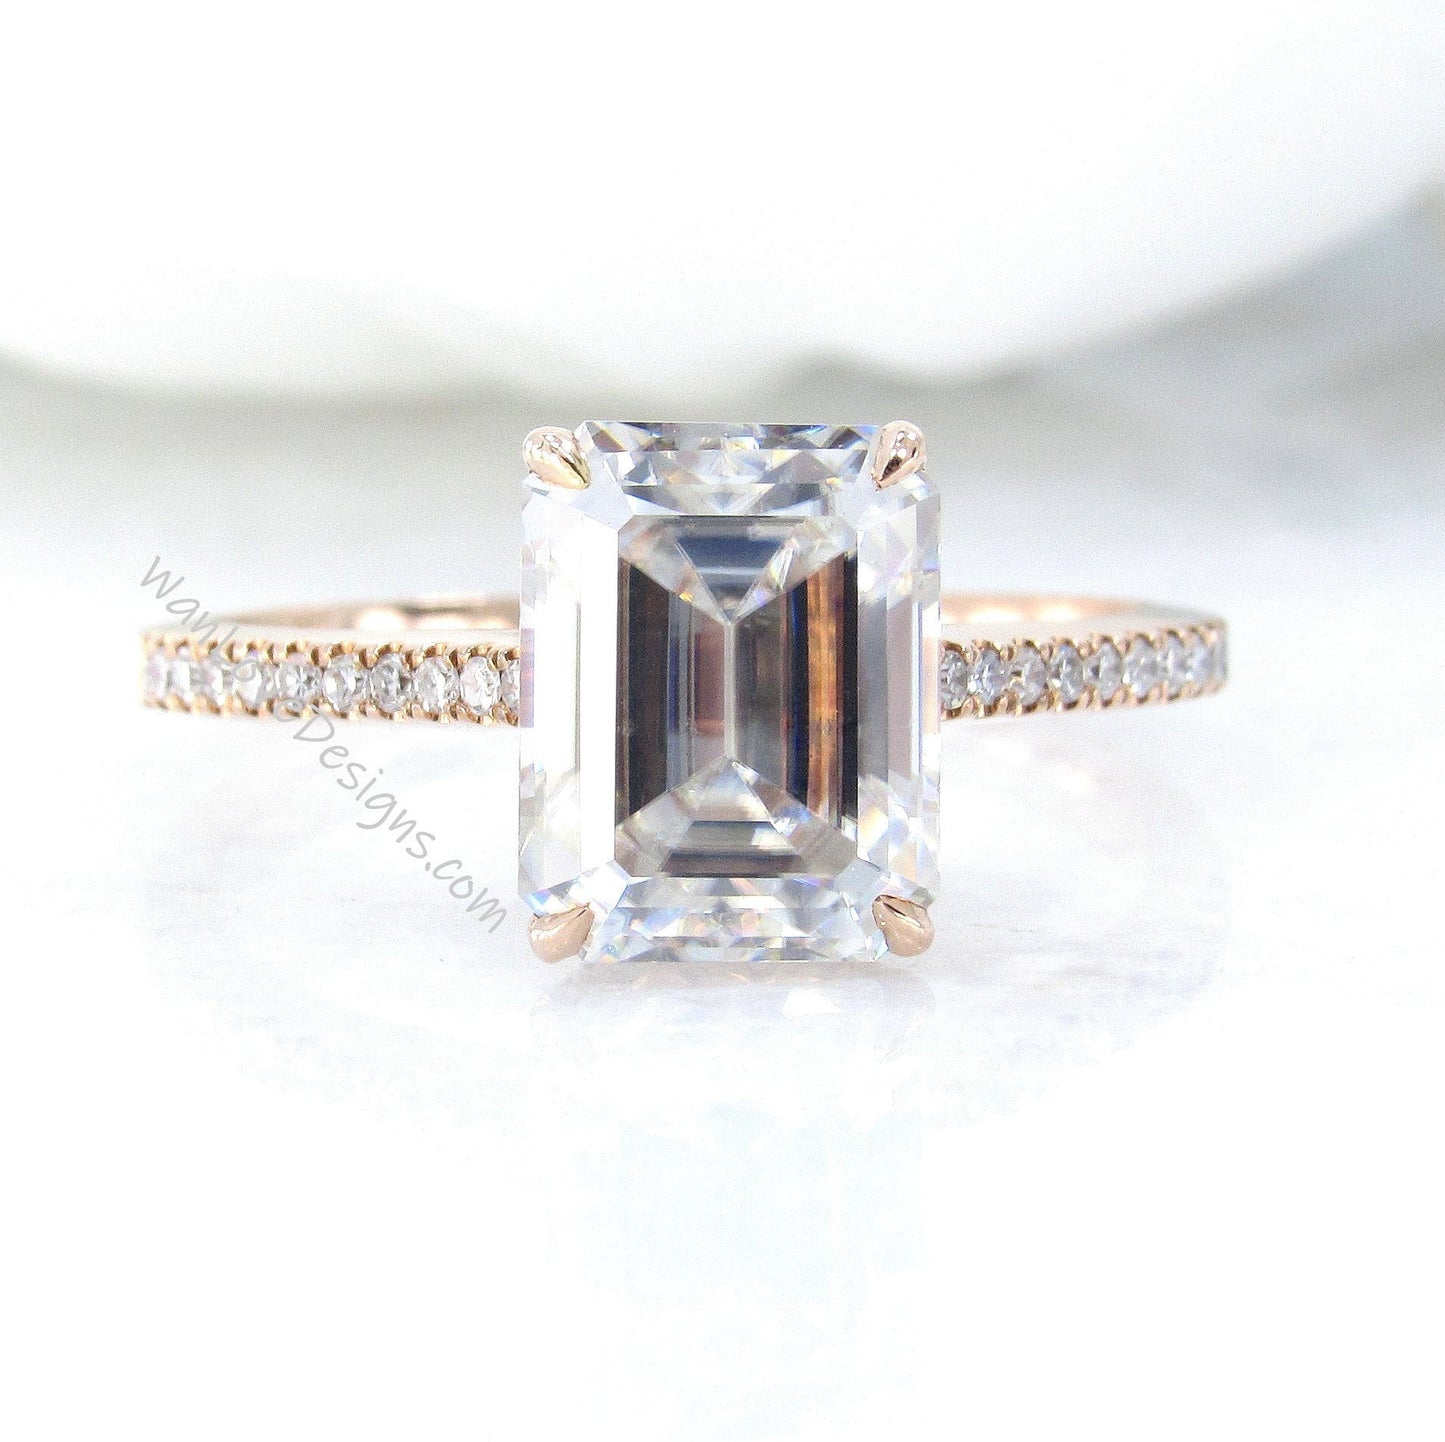 3CT Emerald Cut Moissanite Diamonds Ring, Hidden Halo Ring, Half Eternity Ring, Solid Rose Gold Engagement Ring, Anniversary Ring For Fiancé Wan Love Designs